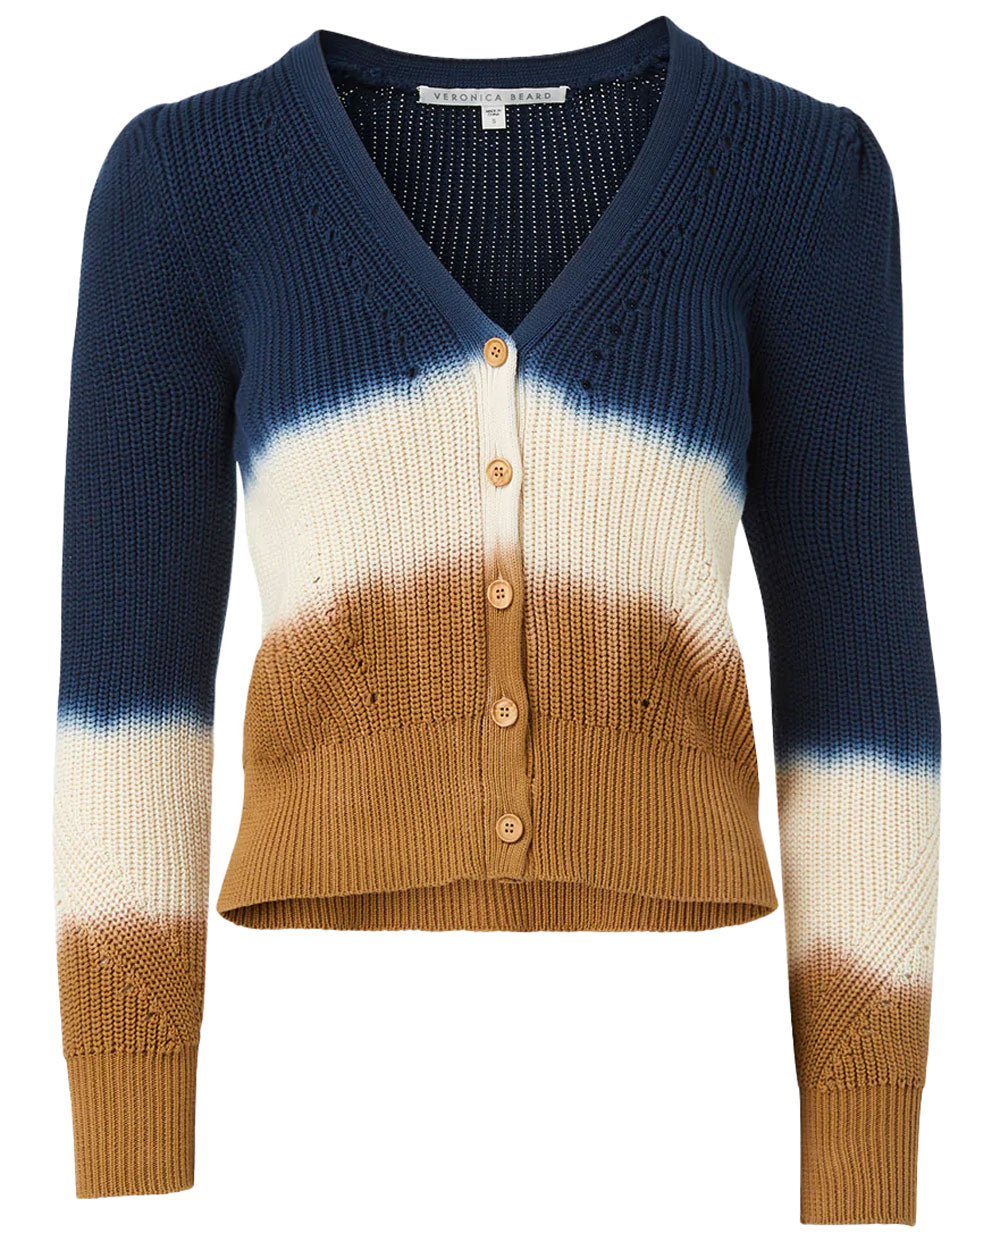 Navy and Ivory Ombre Parula Cardigan